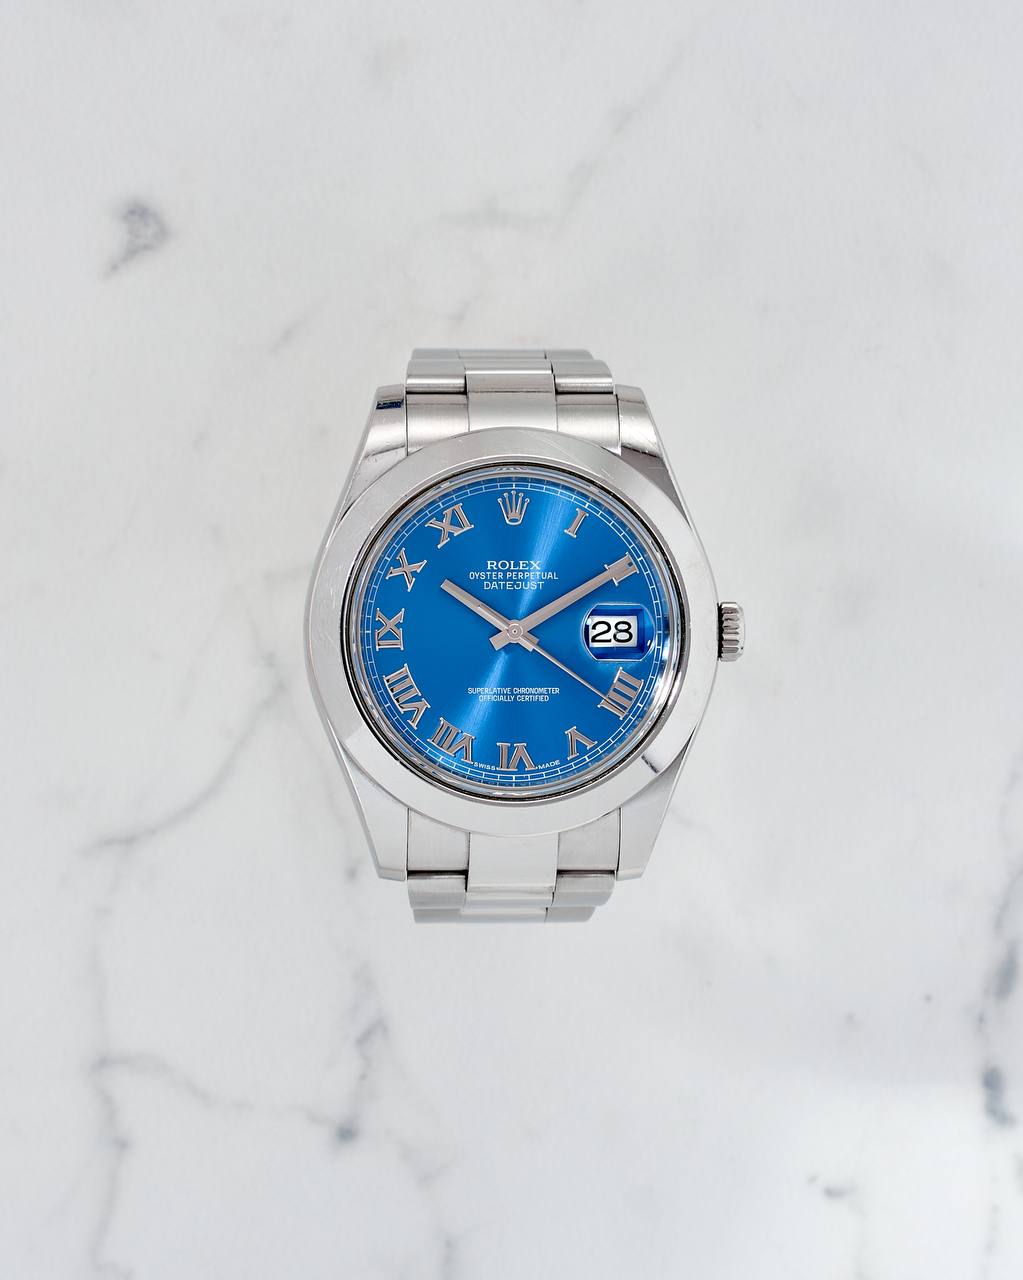 Rolex Oyster Perpetual Datejust II 41 mm Blue Dial with papers 2016 year